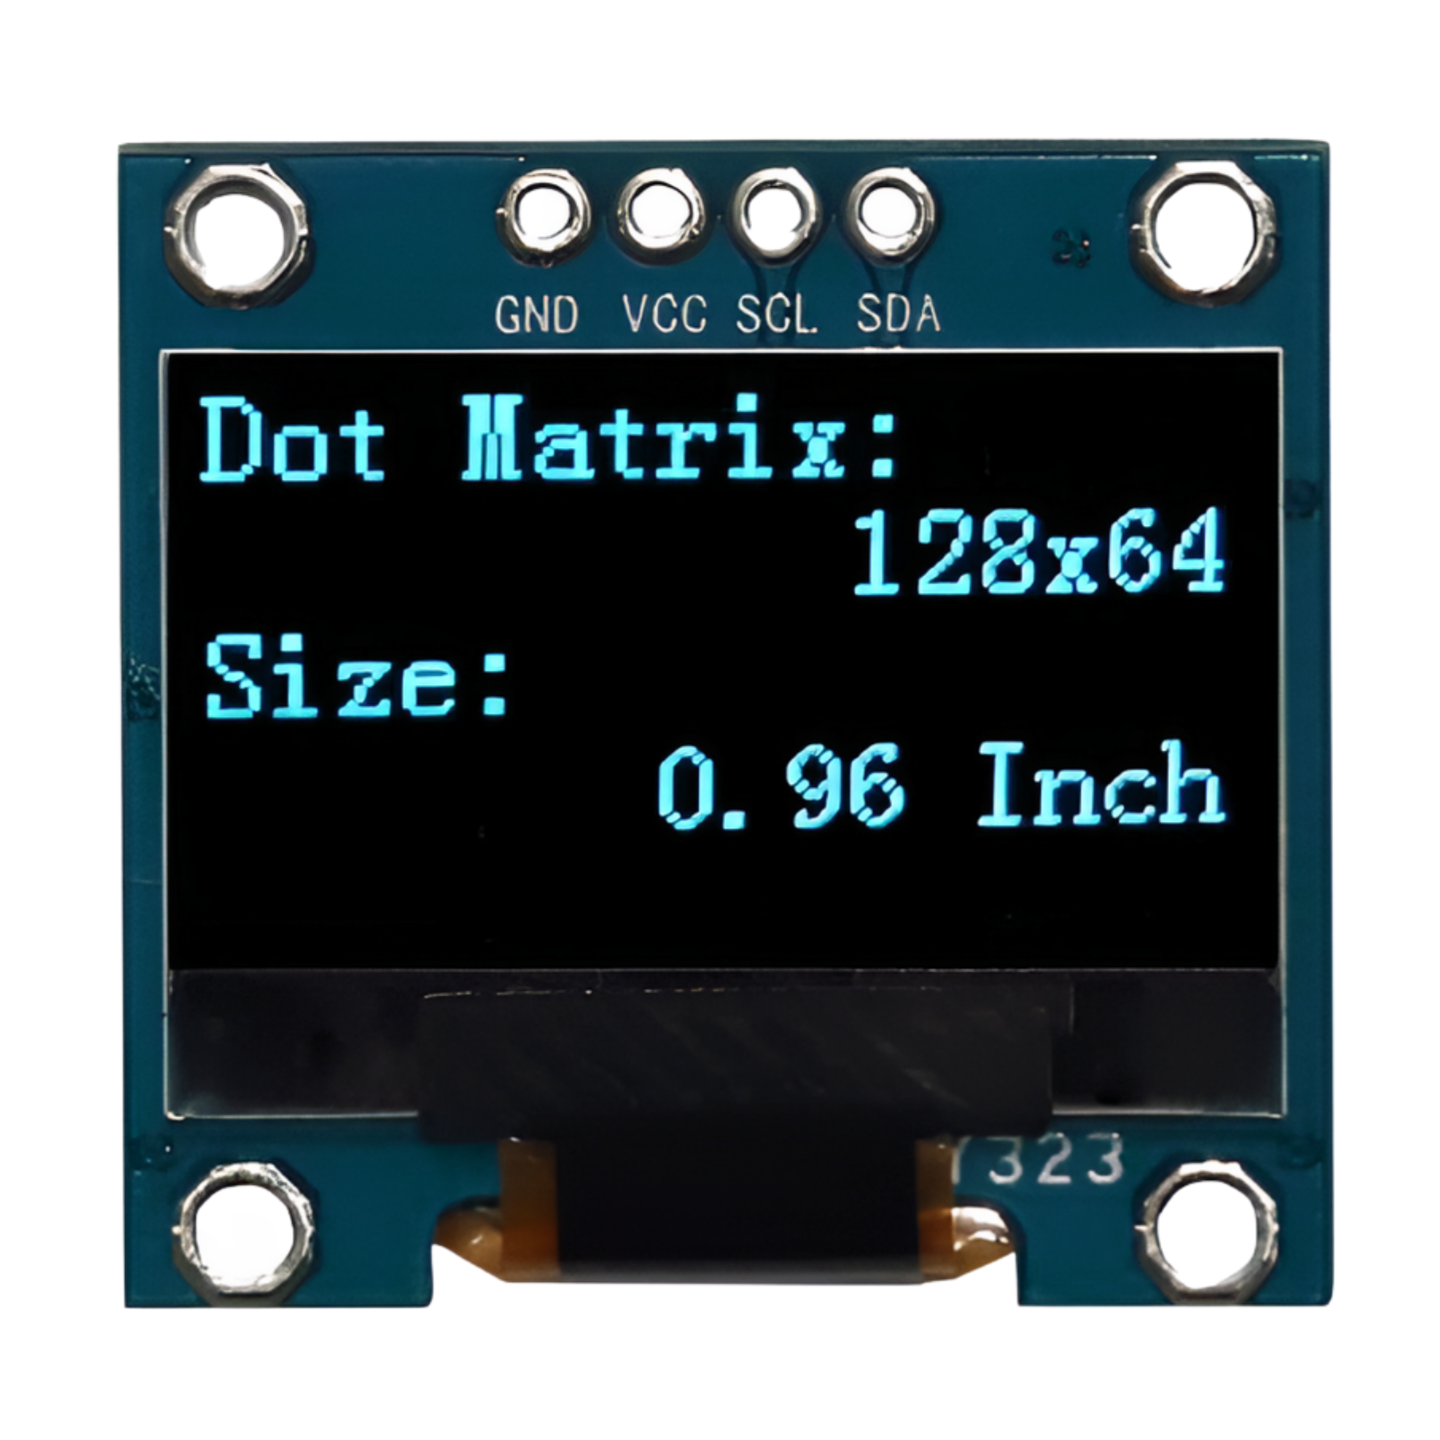 Tutorial – Using the 0.96″ 128 x 64 Graphic I2C OLED Displays with Arduino